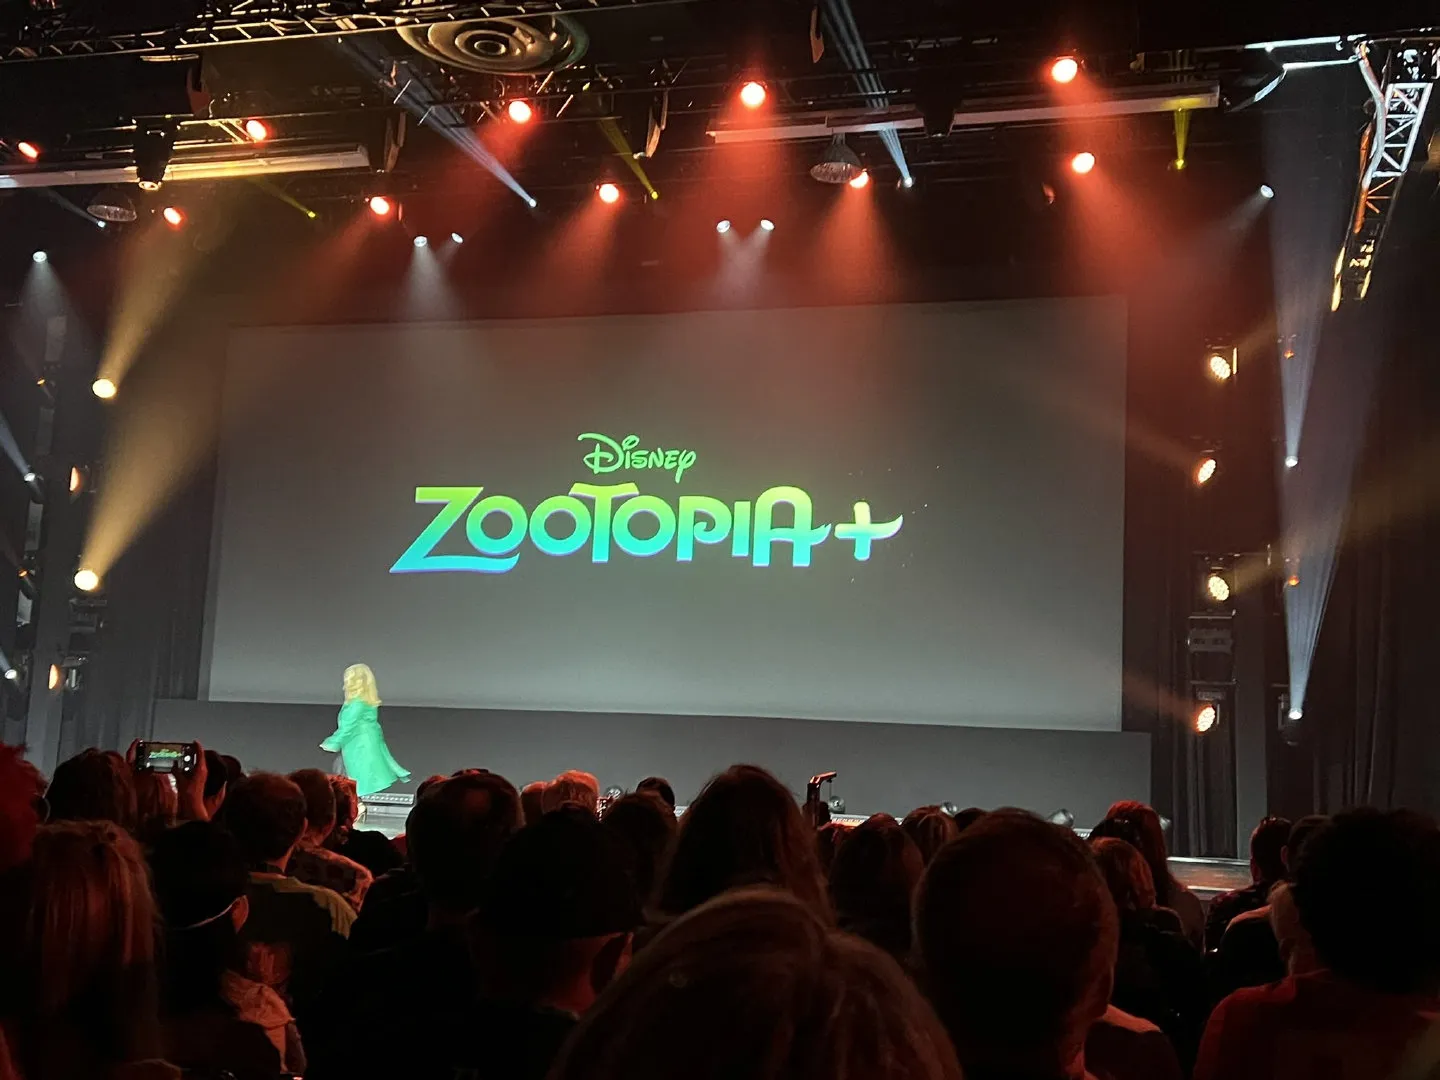 Disney unveils titles for all six episodes of 'Zootopia+' at D23 Expo | FMV6